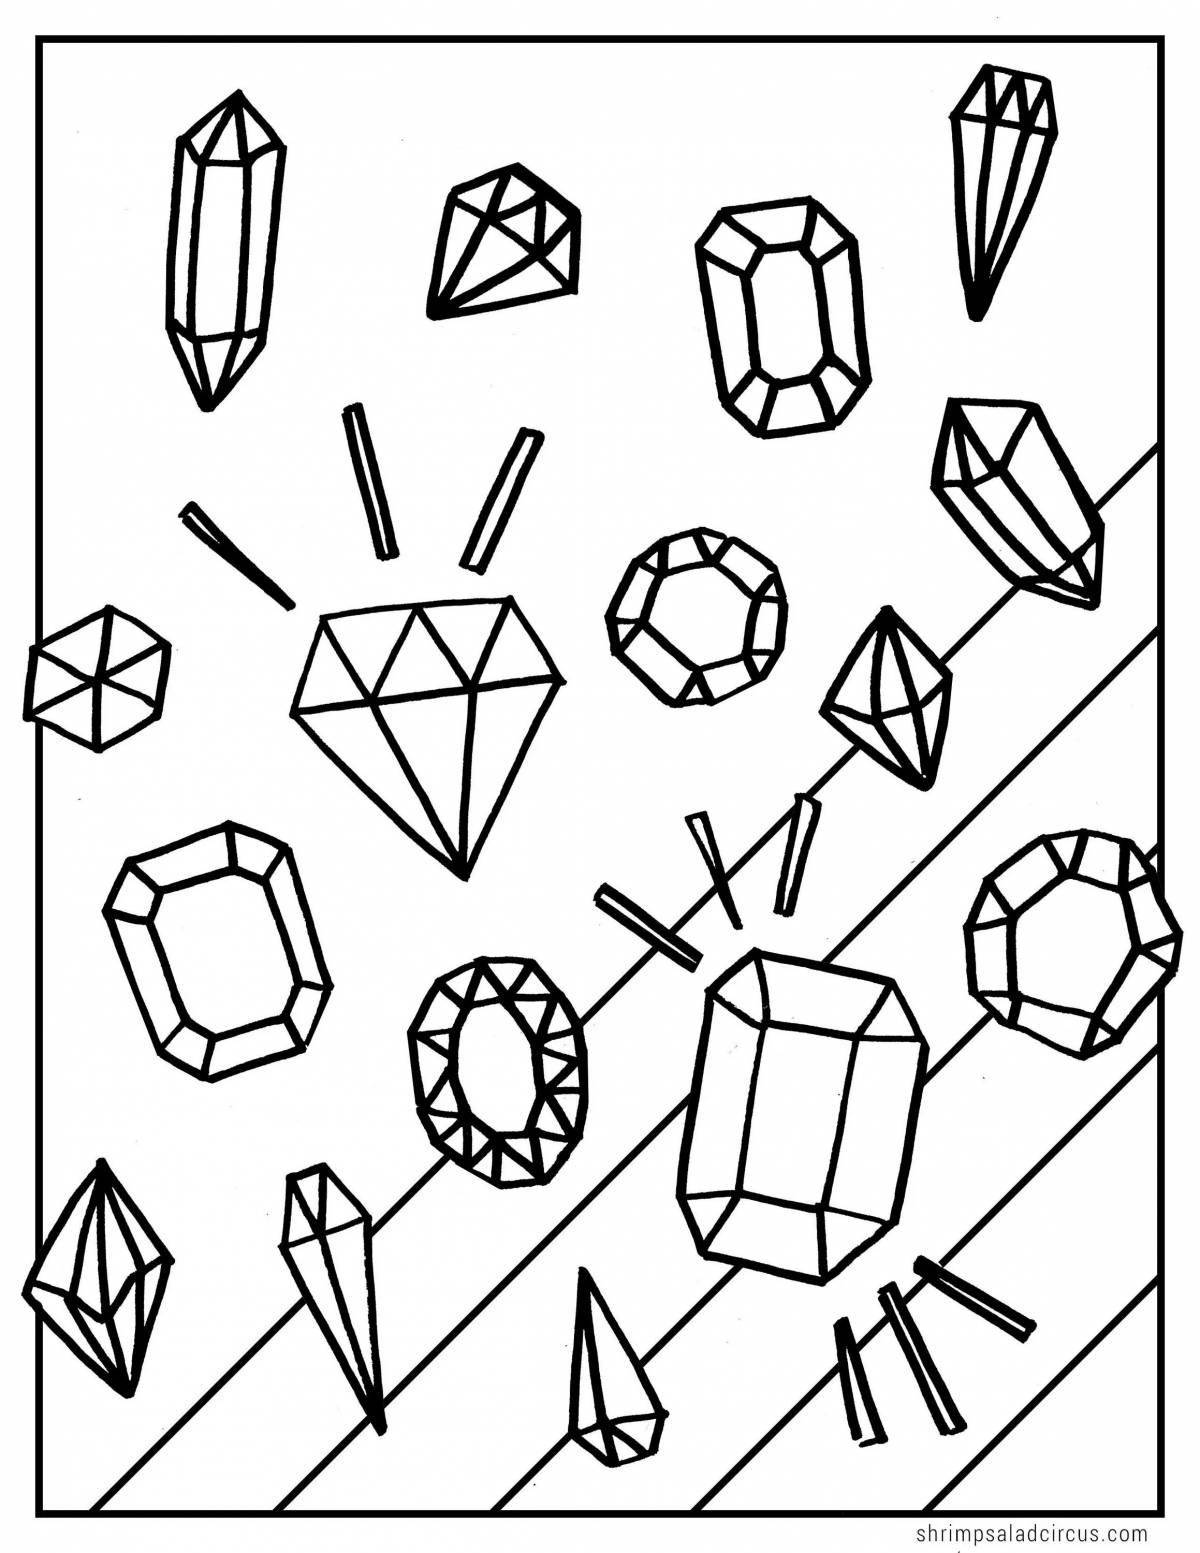 Fine minerals coloring book for kids